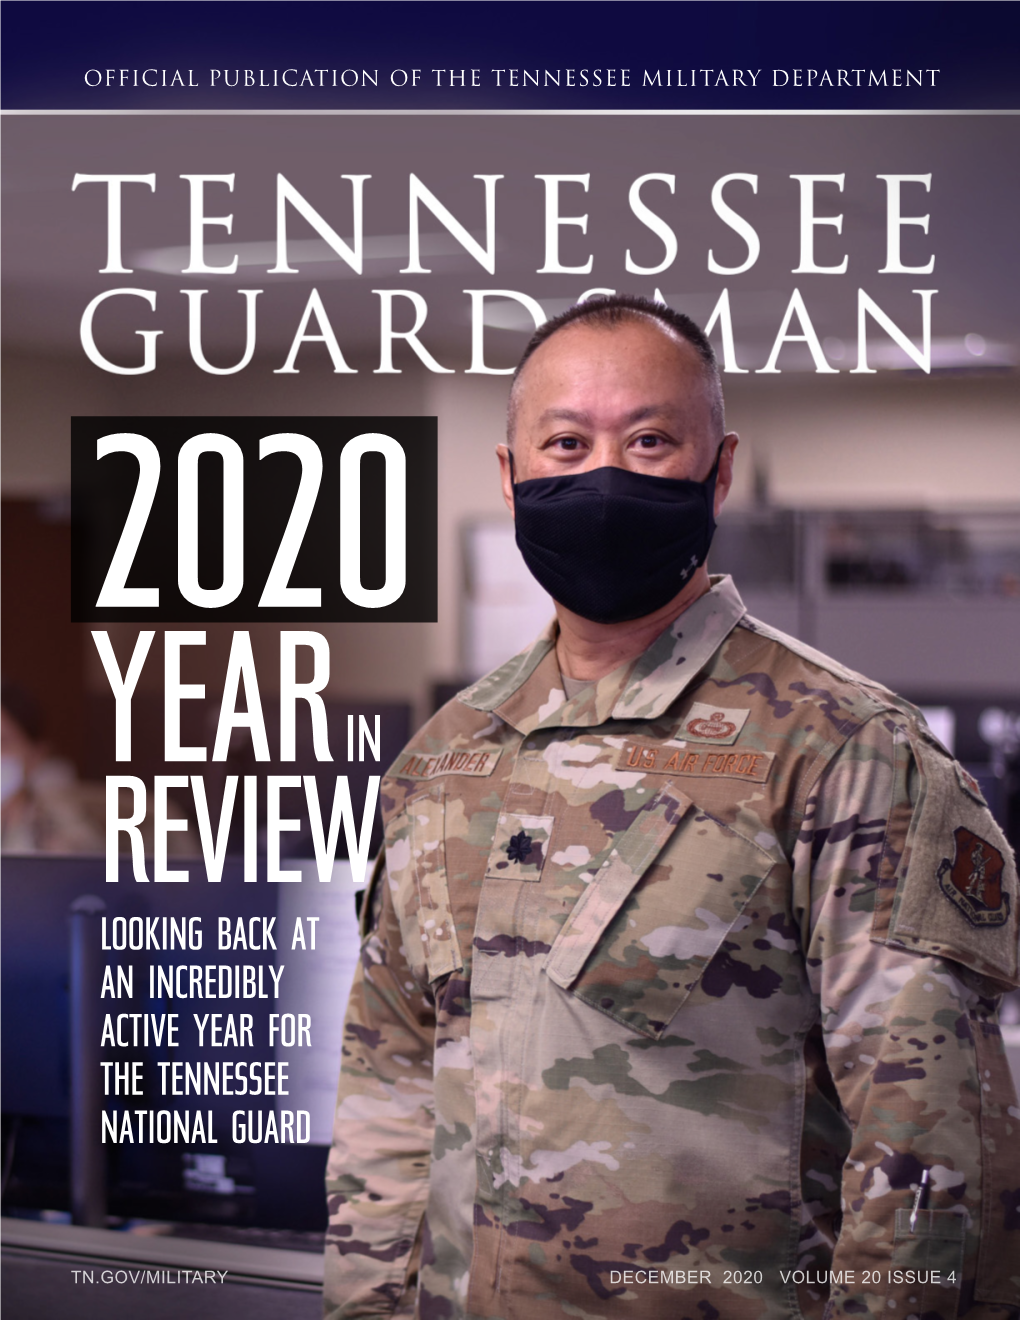 Looking Back at an Incredibly Active Year for the Tennessee National Guard